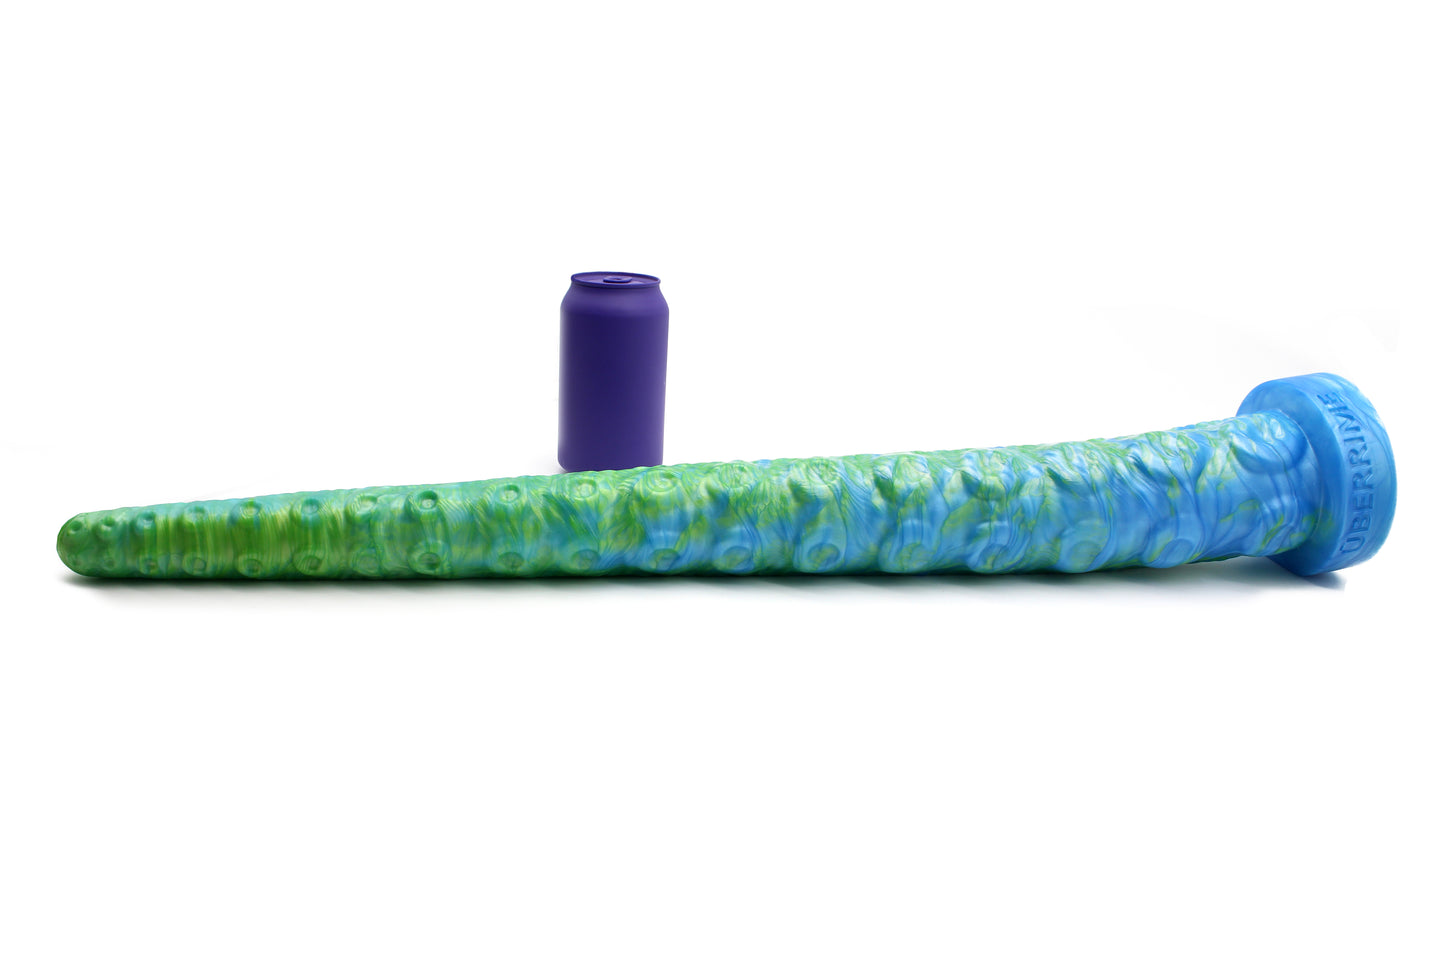 The Gigantis Two Foot Tentacle Dildo